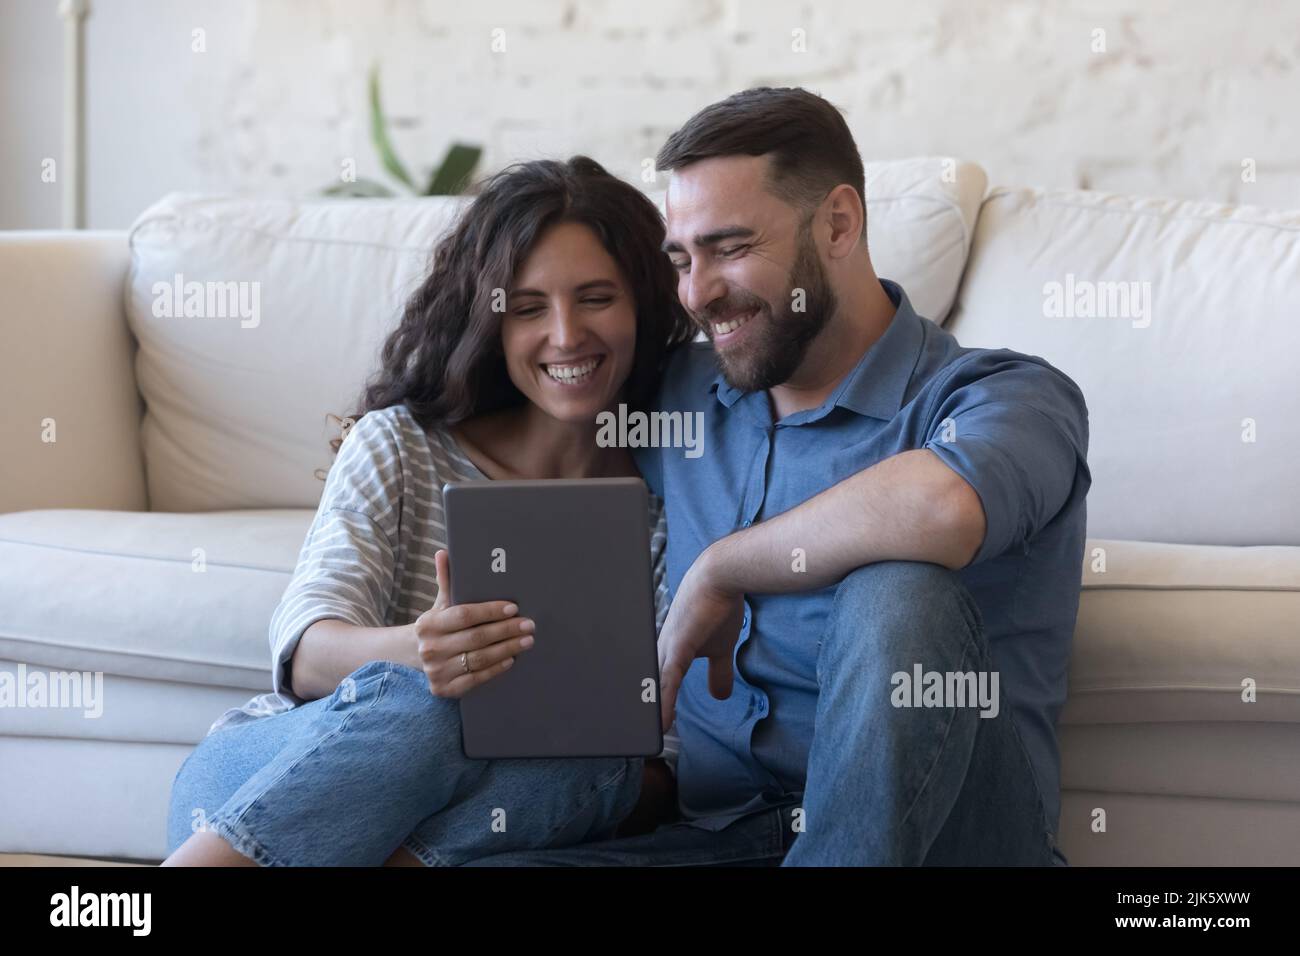 Cheerful couple of satisfied gadget users sitting on floor Stock Photo